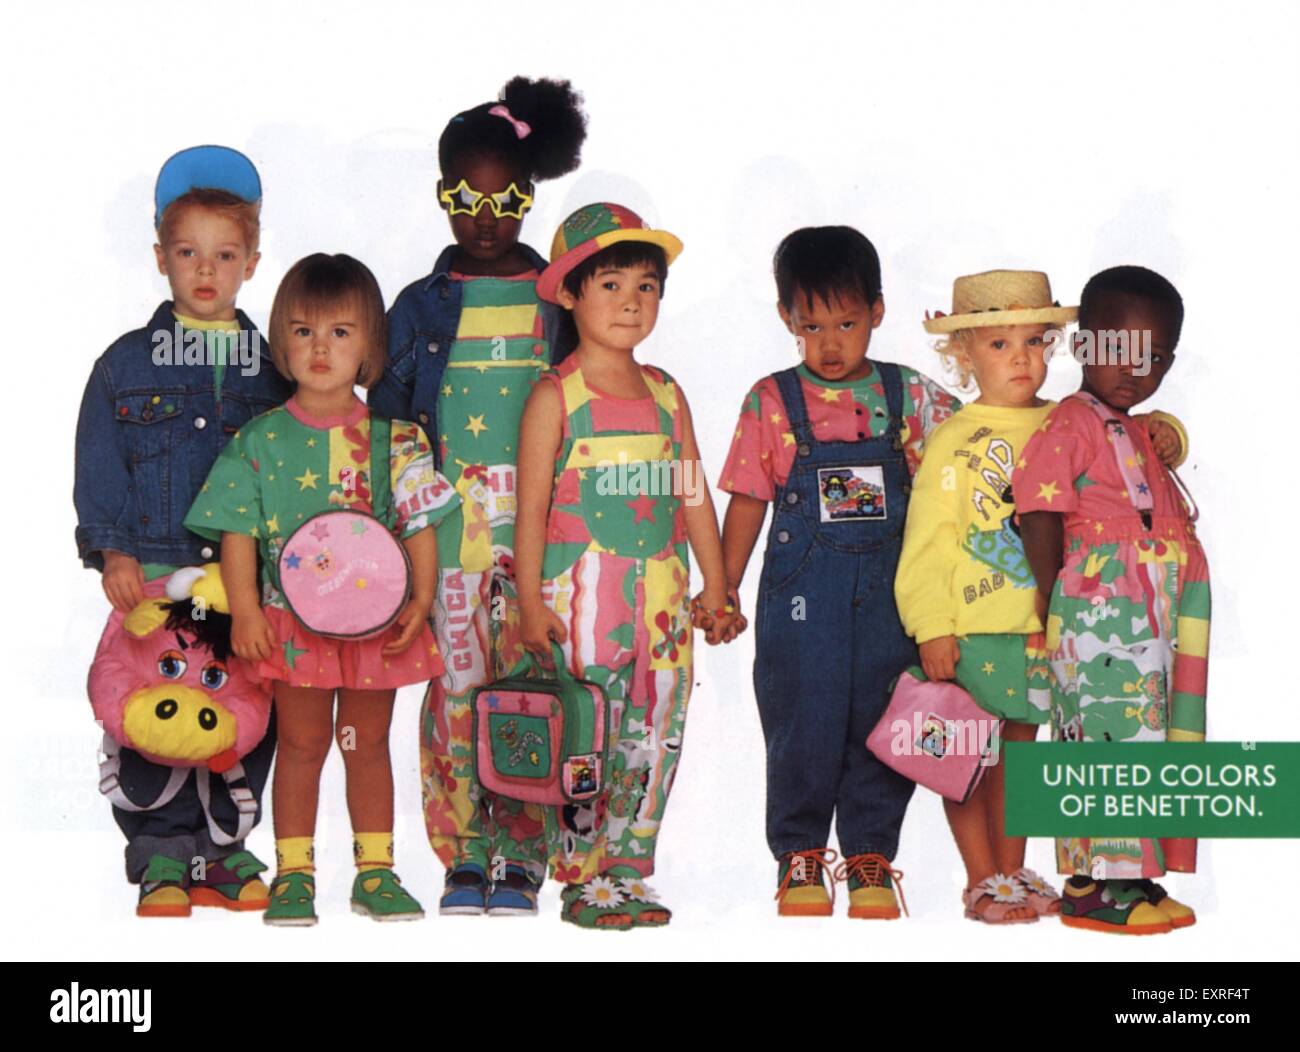 United colors of benetton Cut Out Stock Images & Pictures - Alamy